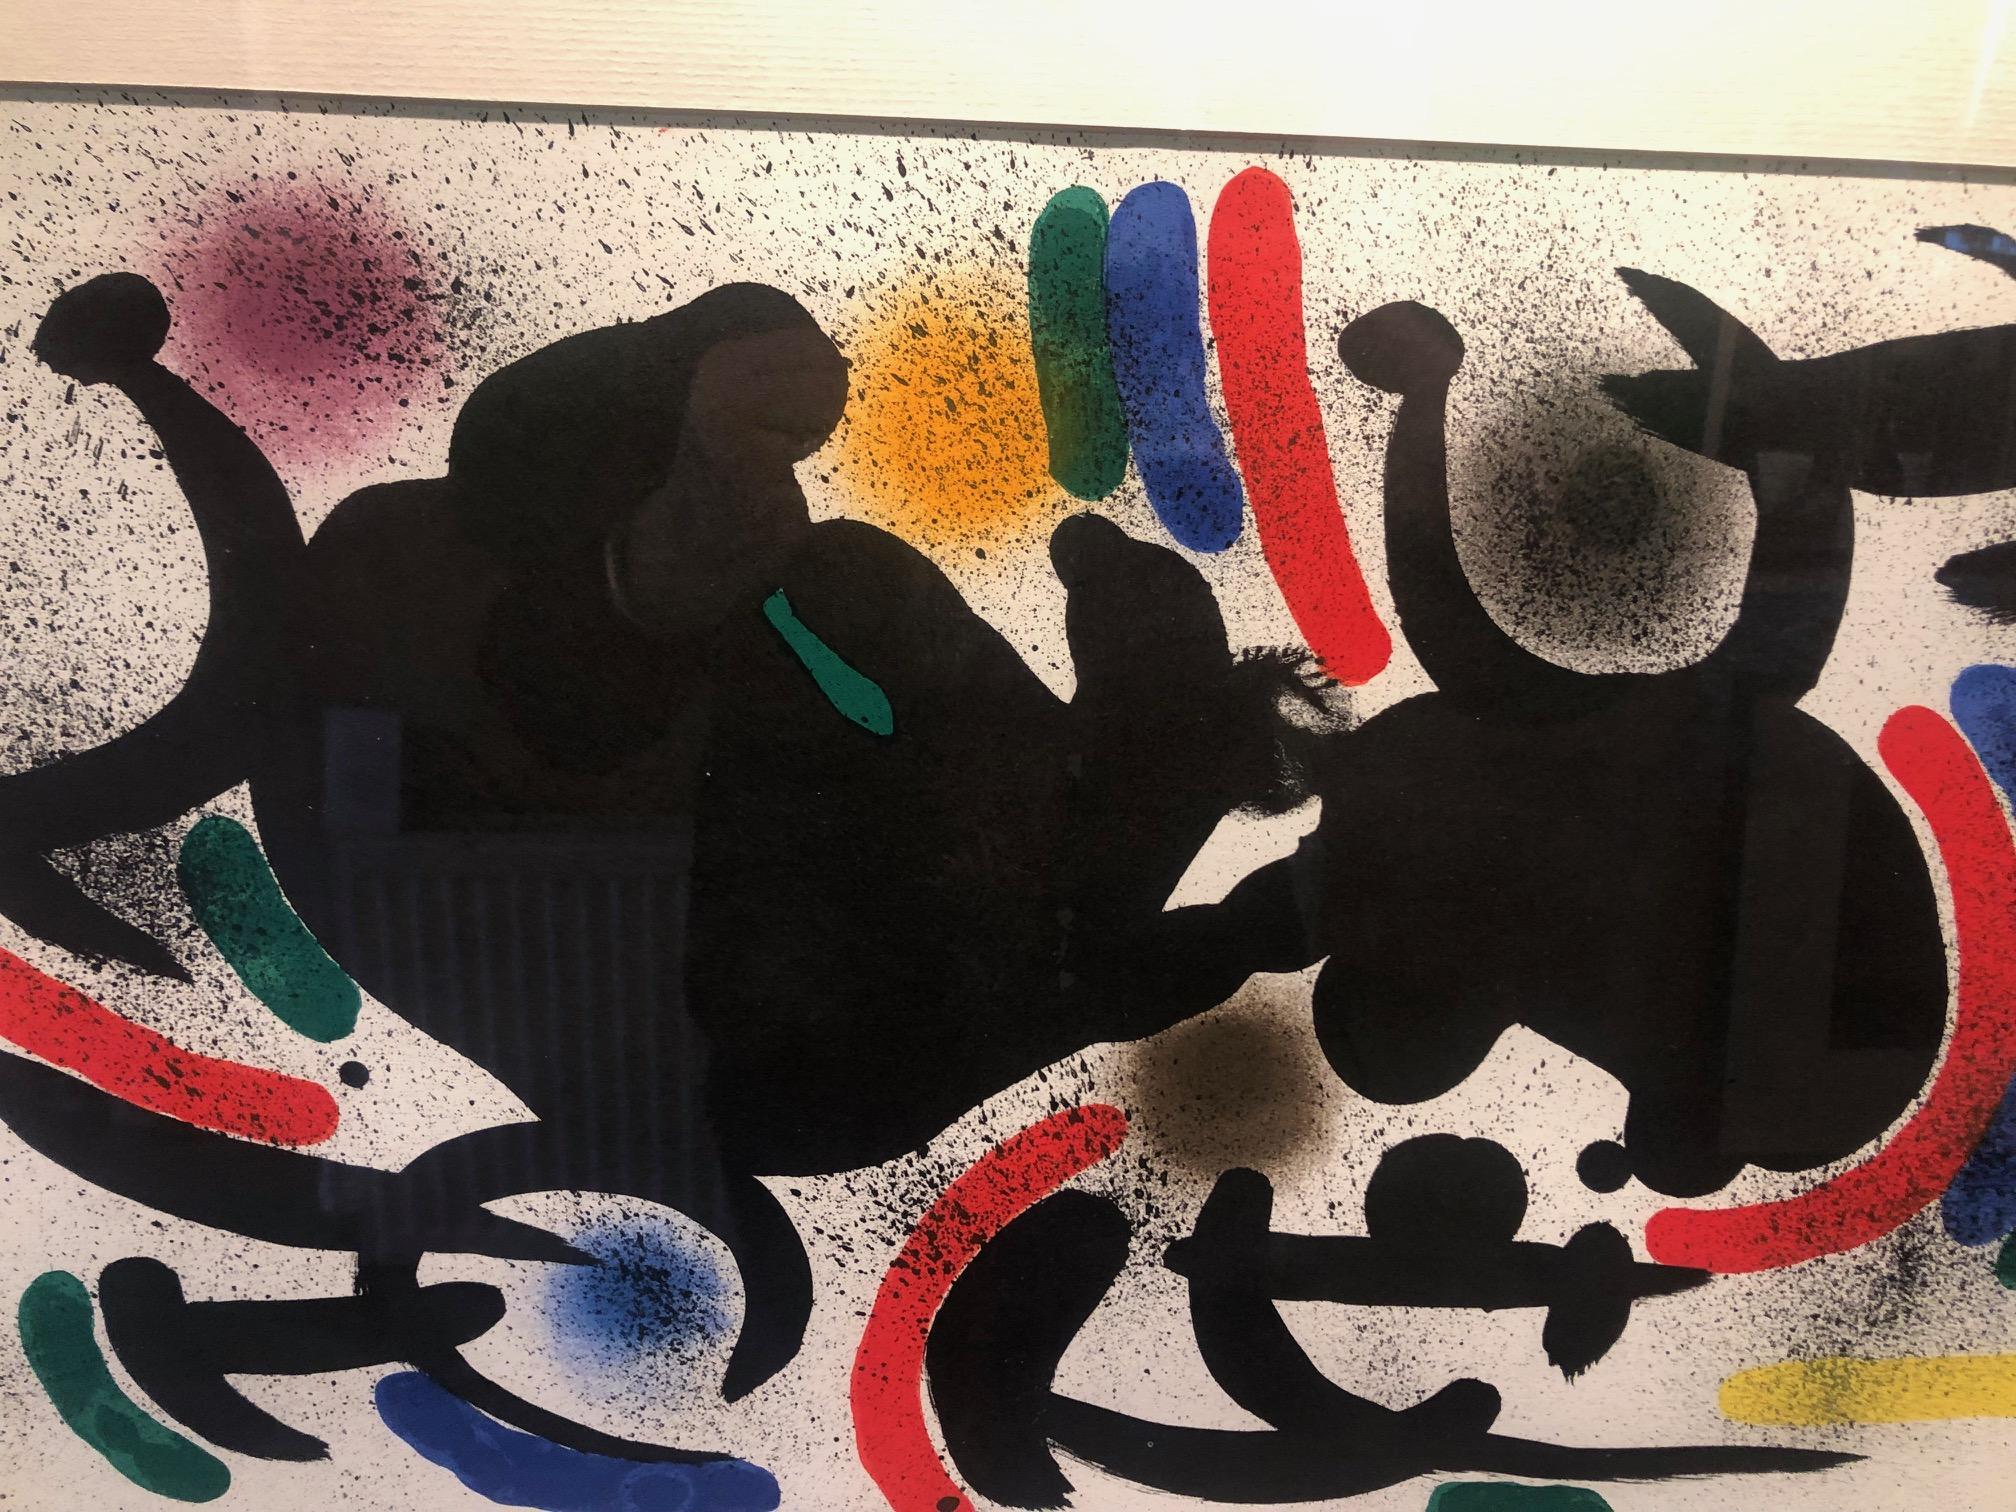 Untitled abstract and colourful limited edition lithograph by Miro - Print by Joan Miró